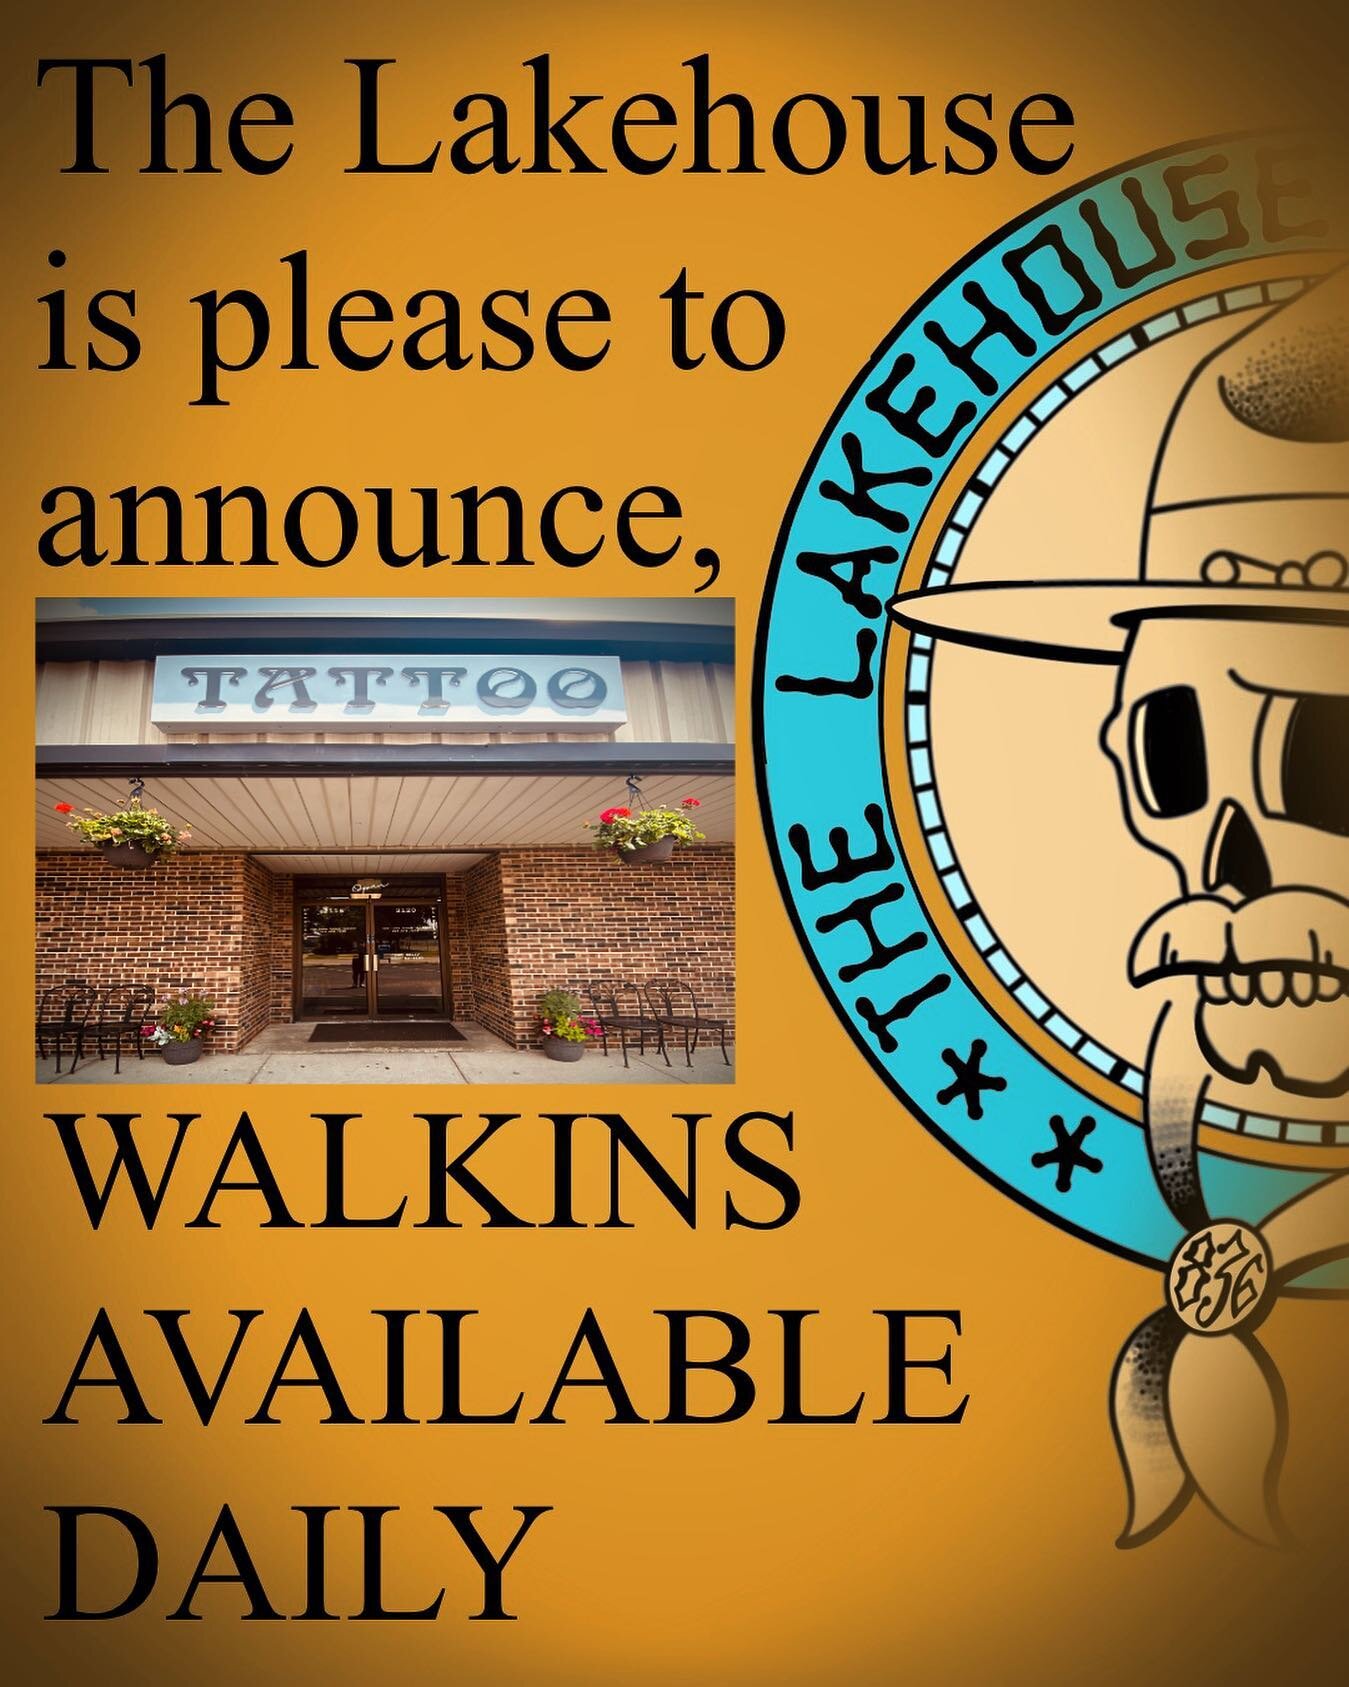 WALK-IN OR CALL AHEAD. 224.678.7272
No guarantees, but we&rsquo;ll try our best to get you in same day! TATTOOS AND PIERCING BY APPOINTMENT OR CHANCE HERE AT THE LAKEHOUSE. #thelakehousetattoo #walkintattoo #tattoos #mchenrycounty #lithlife #lakehous